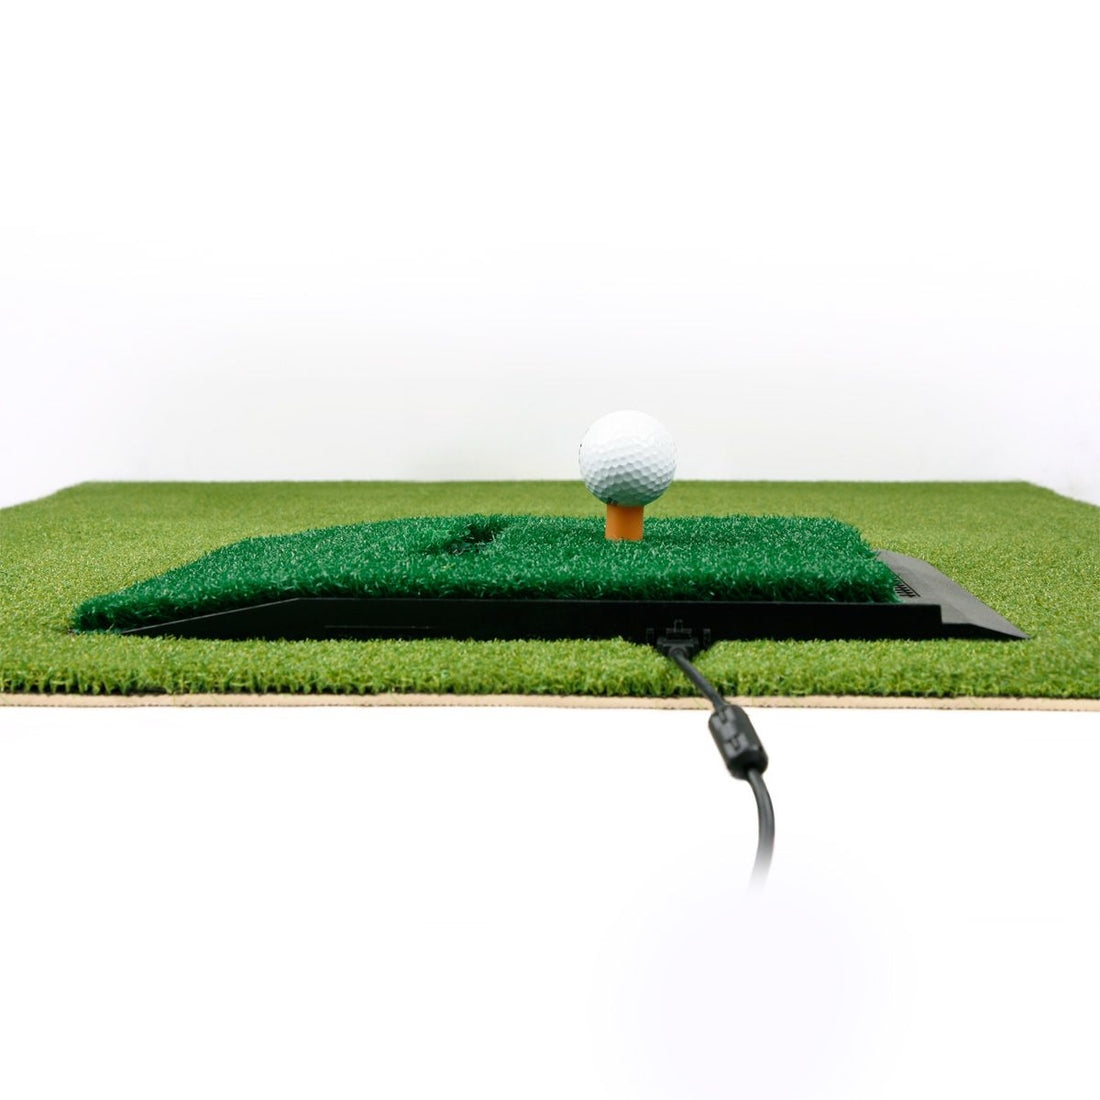 ground level view of the Optishot 2 In-Home Golf Simulator base inside the pre-cut hole in an Orlimar Golf Mat